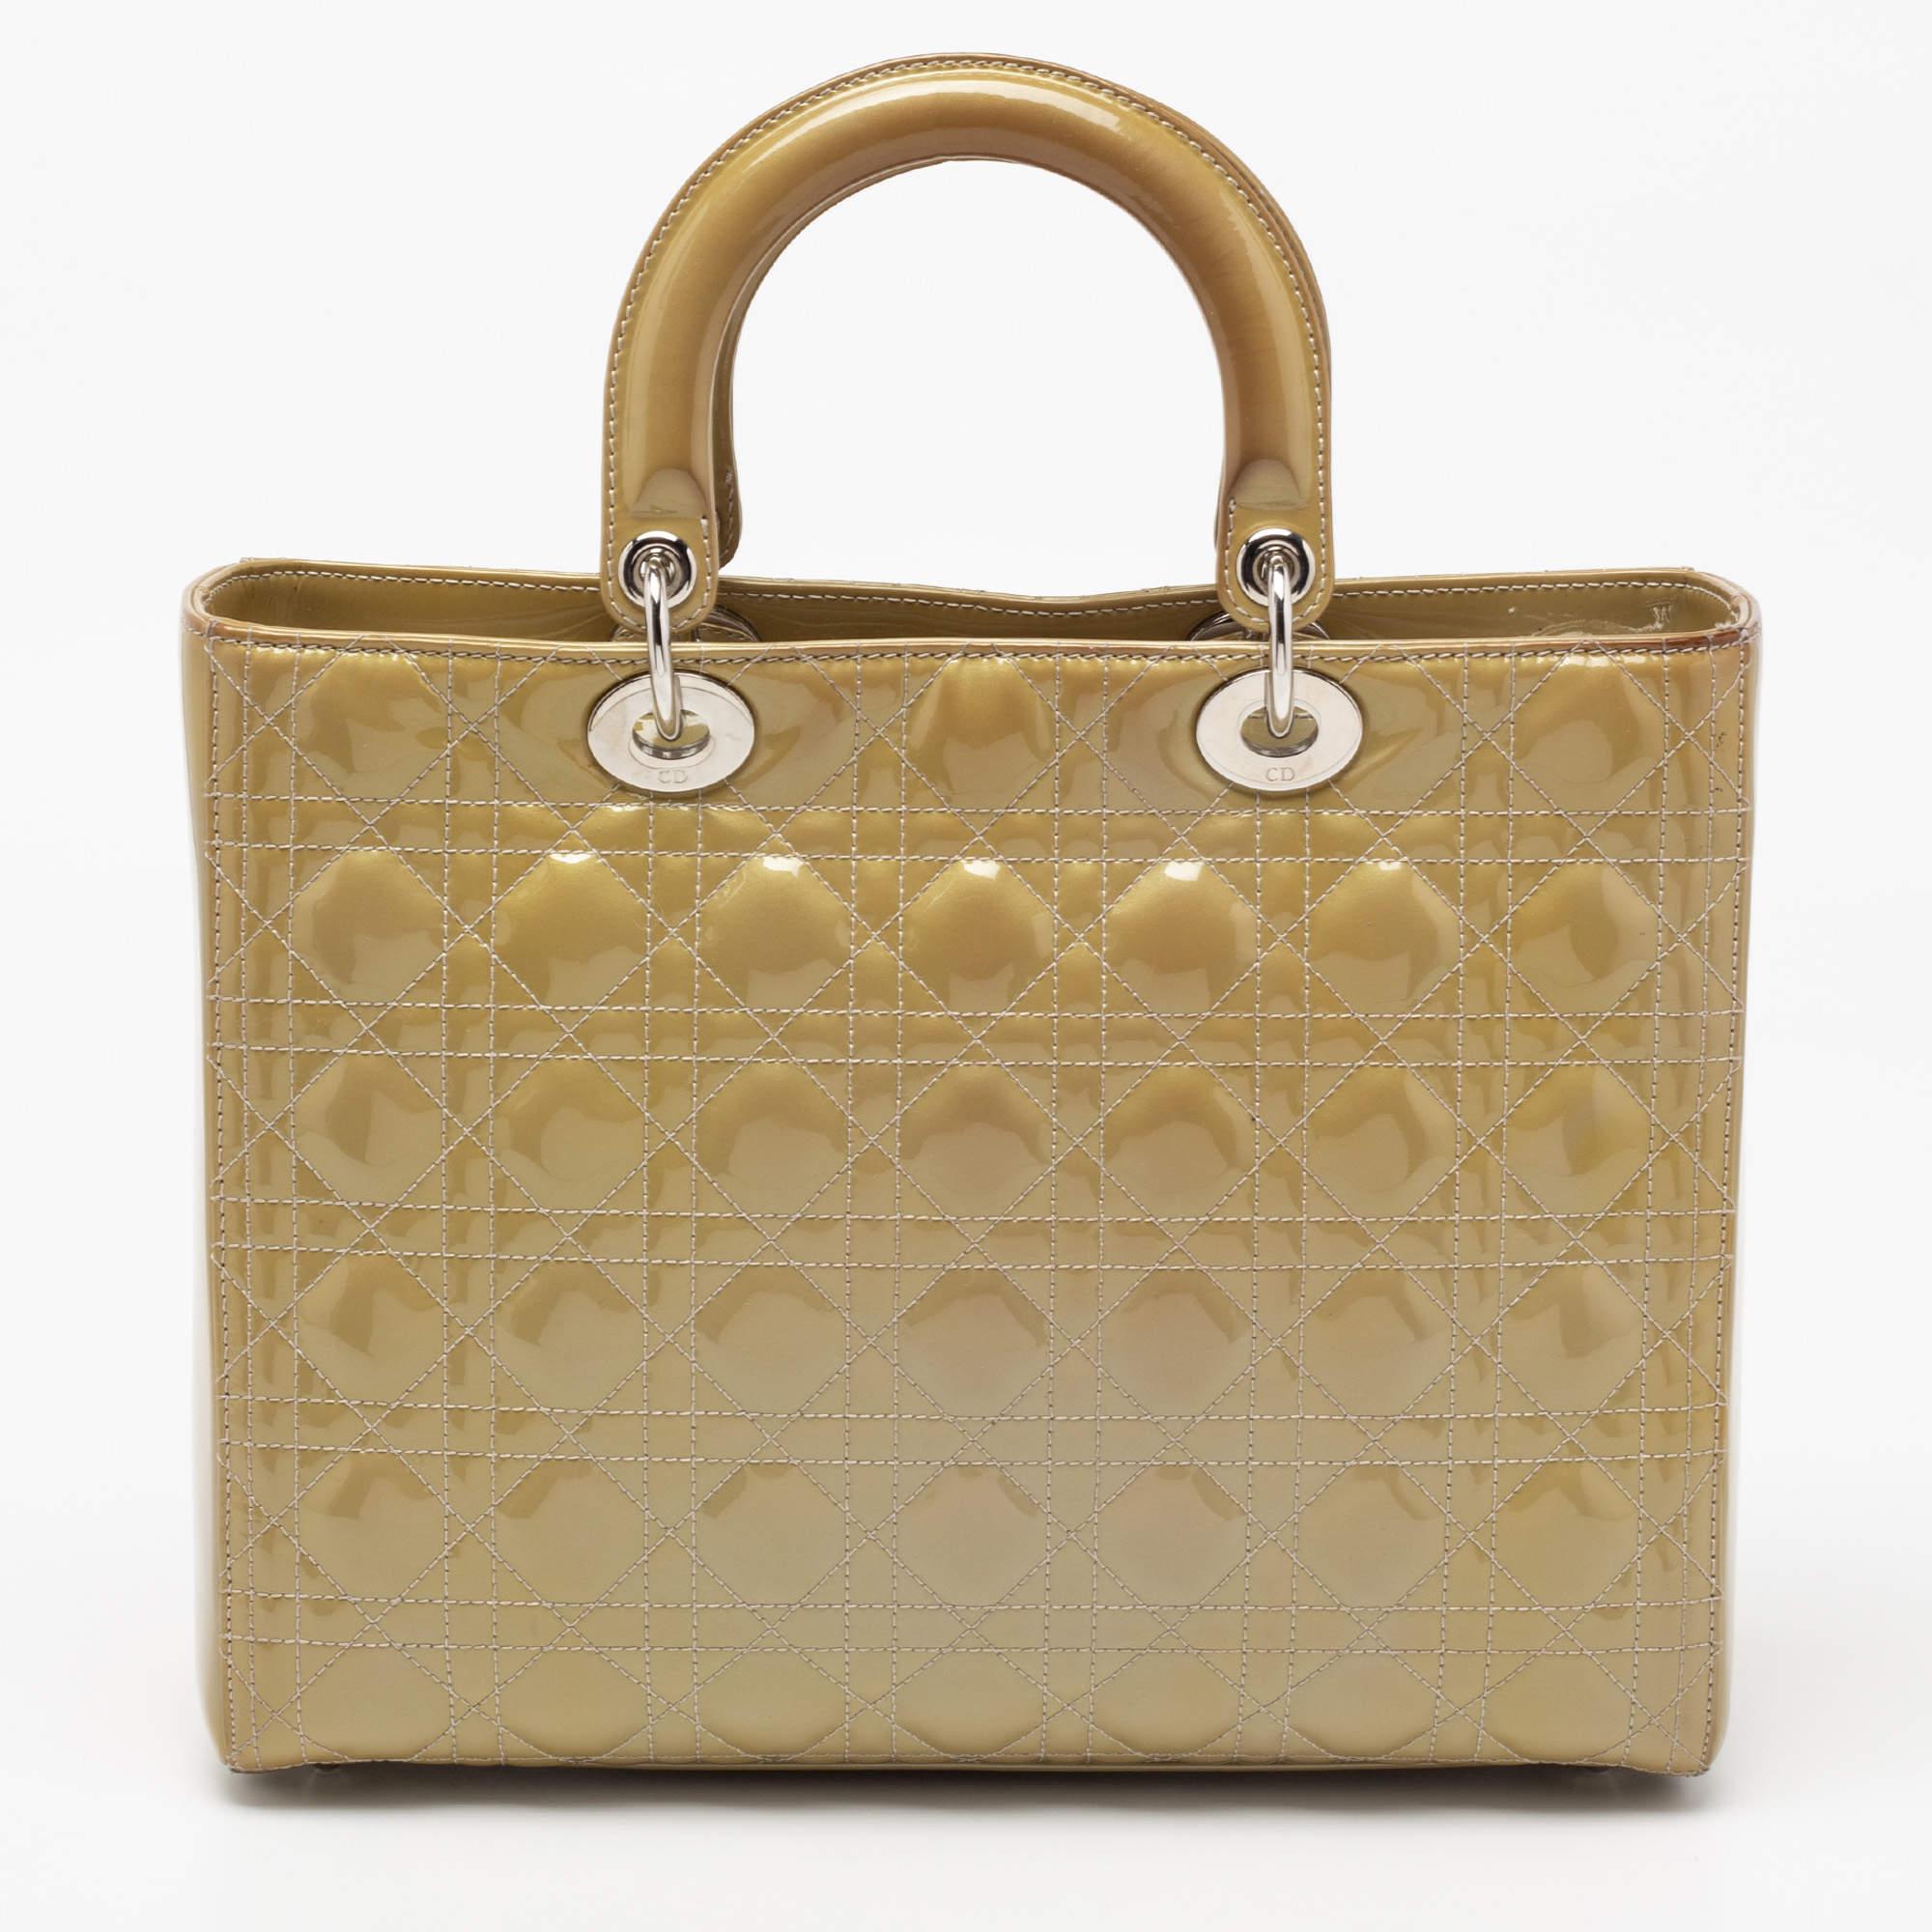 The Lady Dior tote is a Dior creation that has gained wide recognition and is a coveted bag that every fashionista craves to possess. The beige tote has been crafted from patent leather and carries the signature Cannage quilt. It is equipped with a